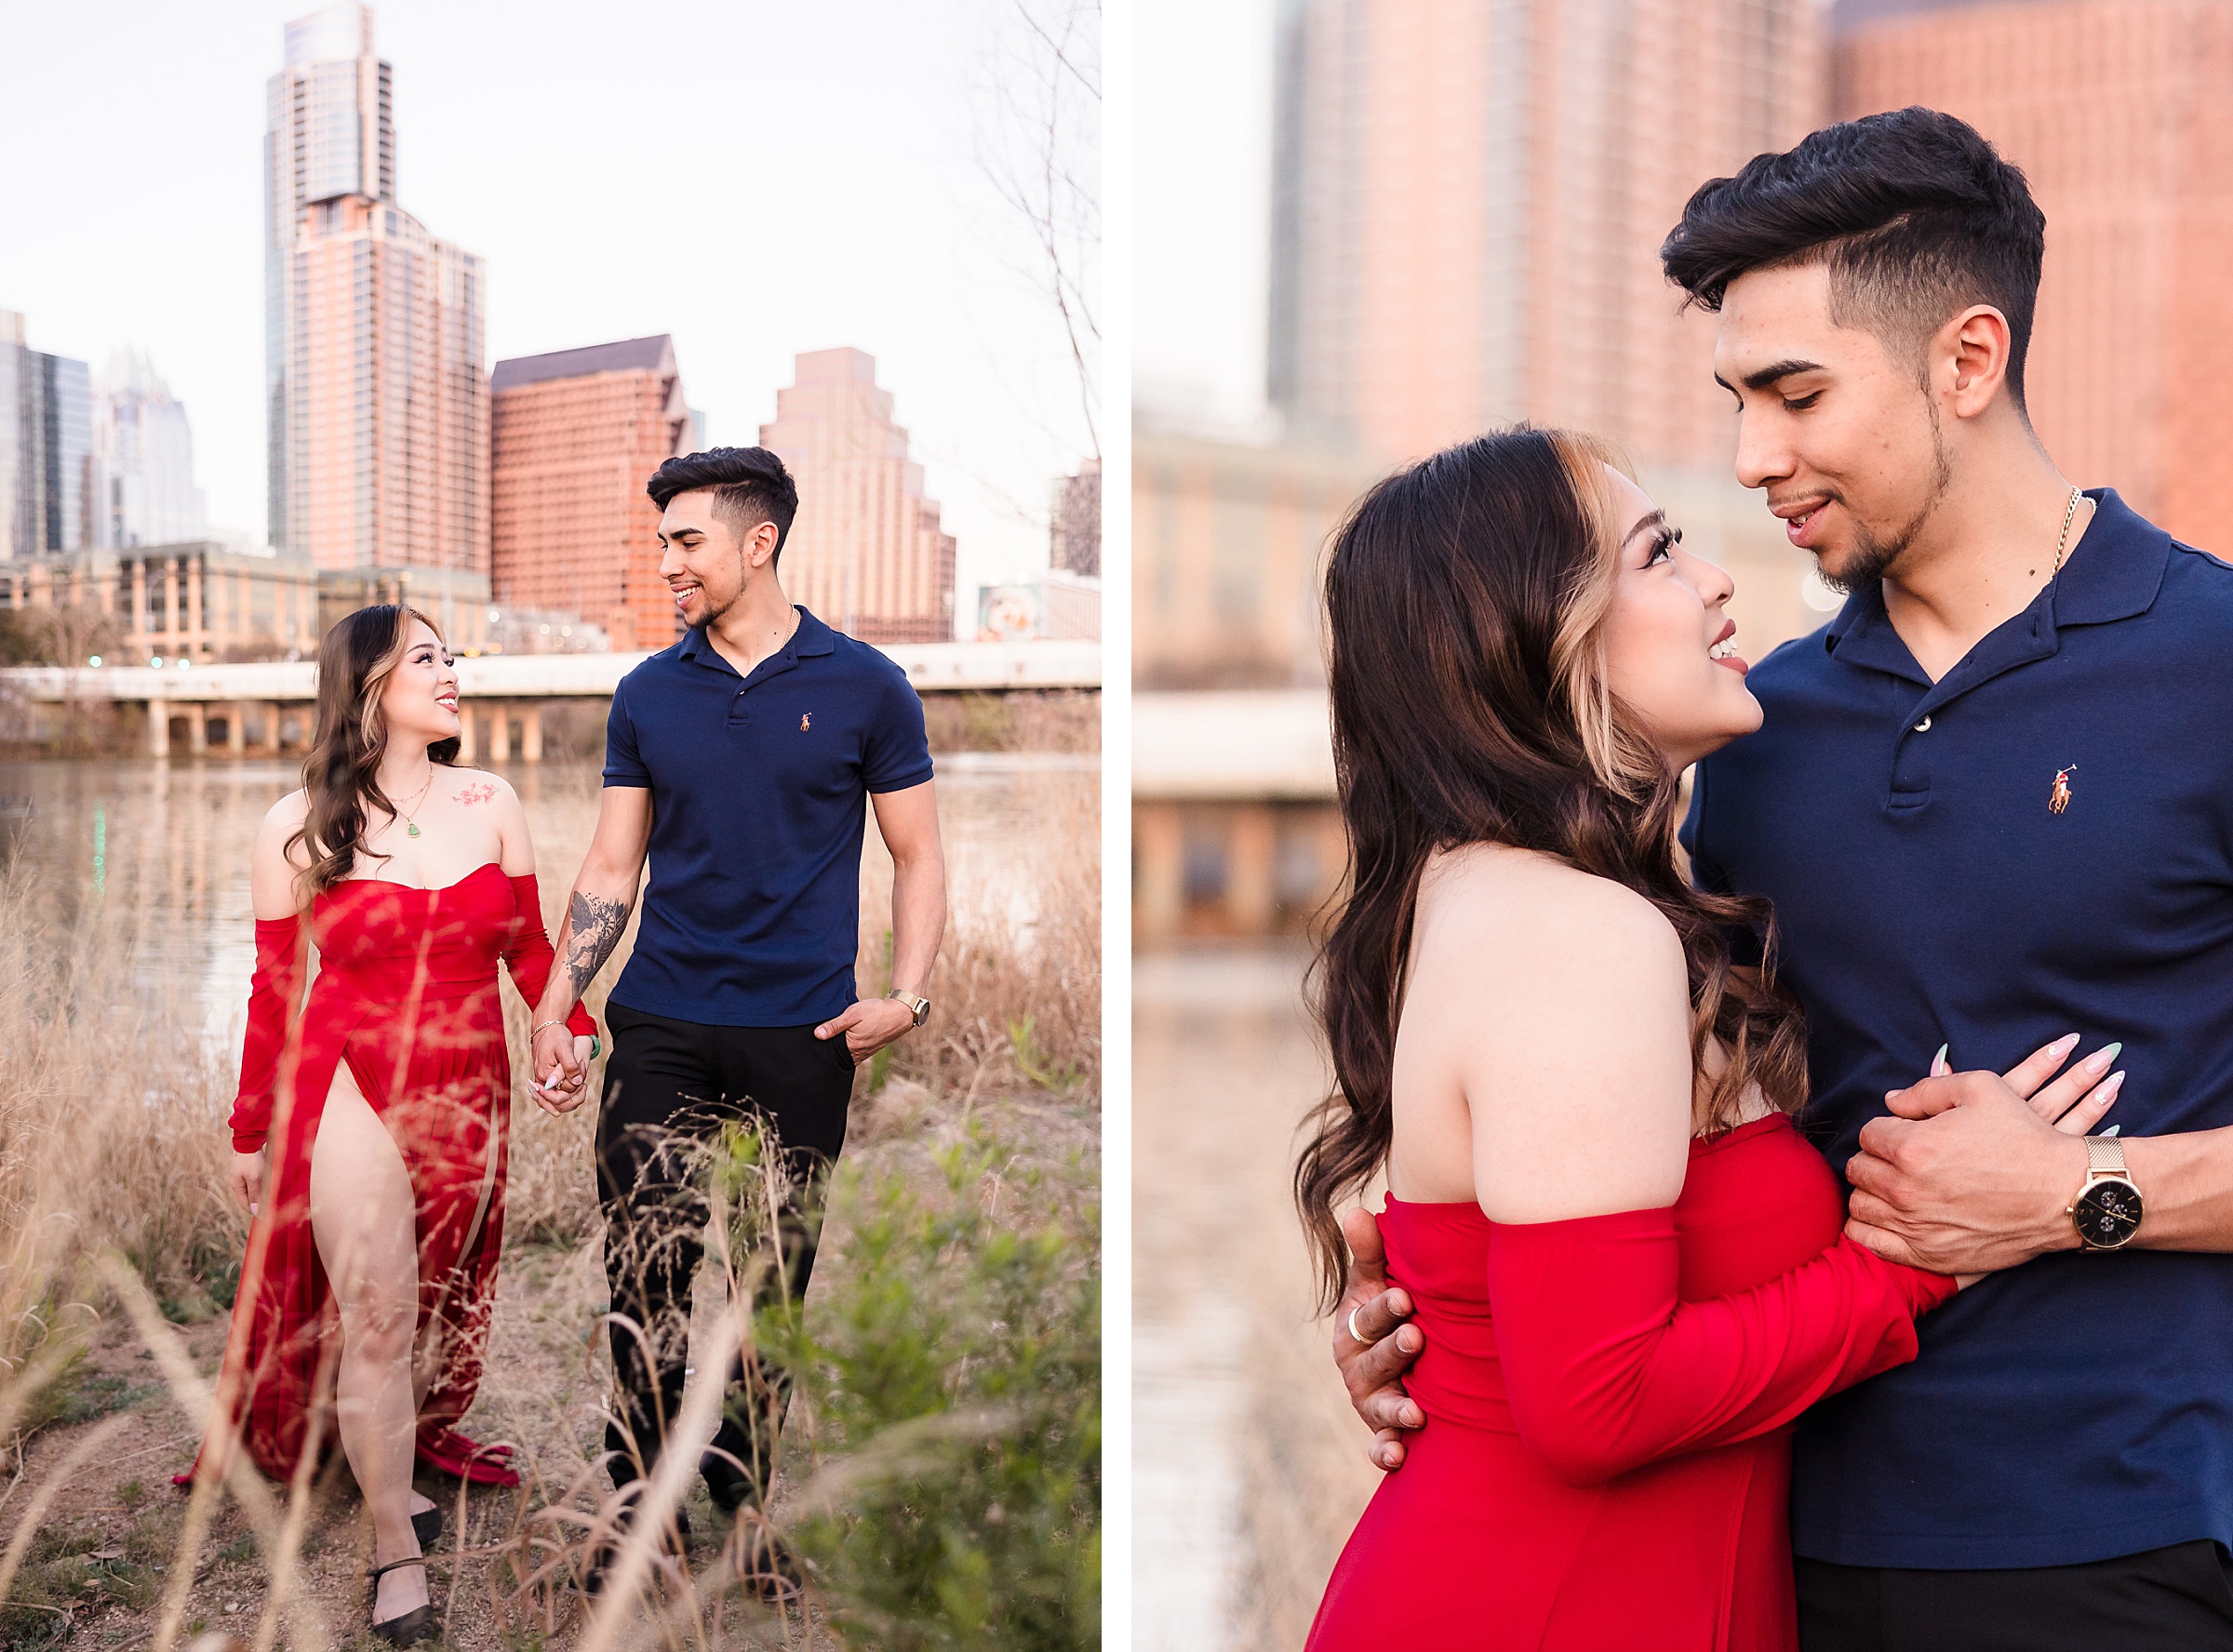 Couple celebrate their relationship in downtown Austin, Texas. Photograph taken by Austin wedding photographers, Joanna and Brett Photography